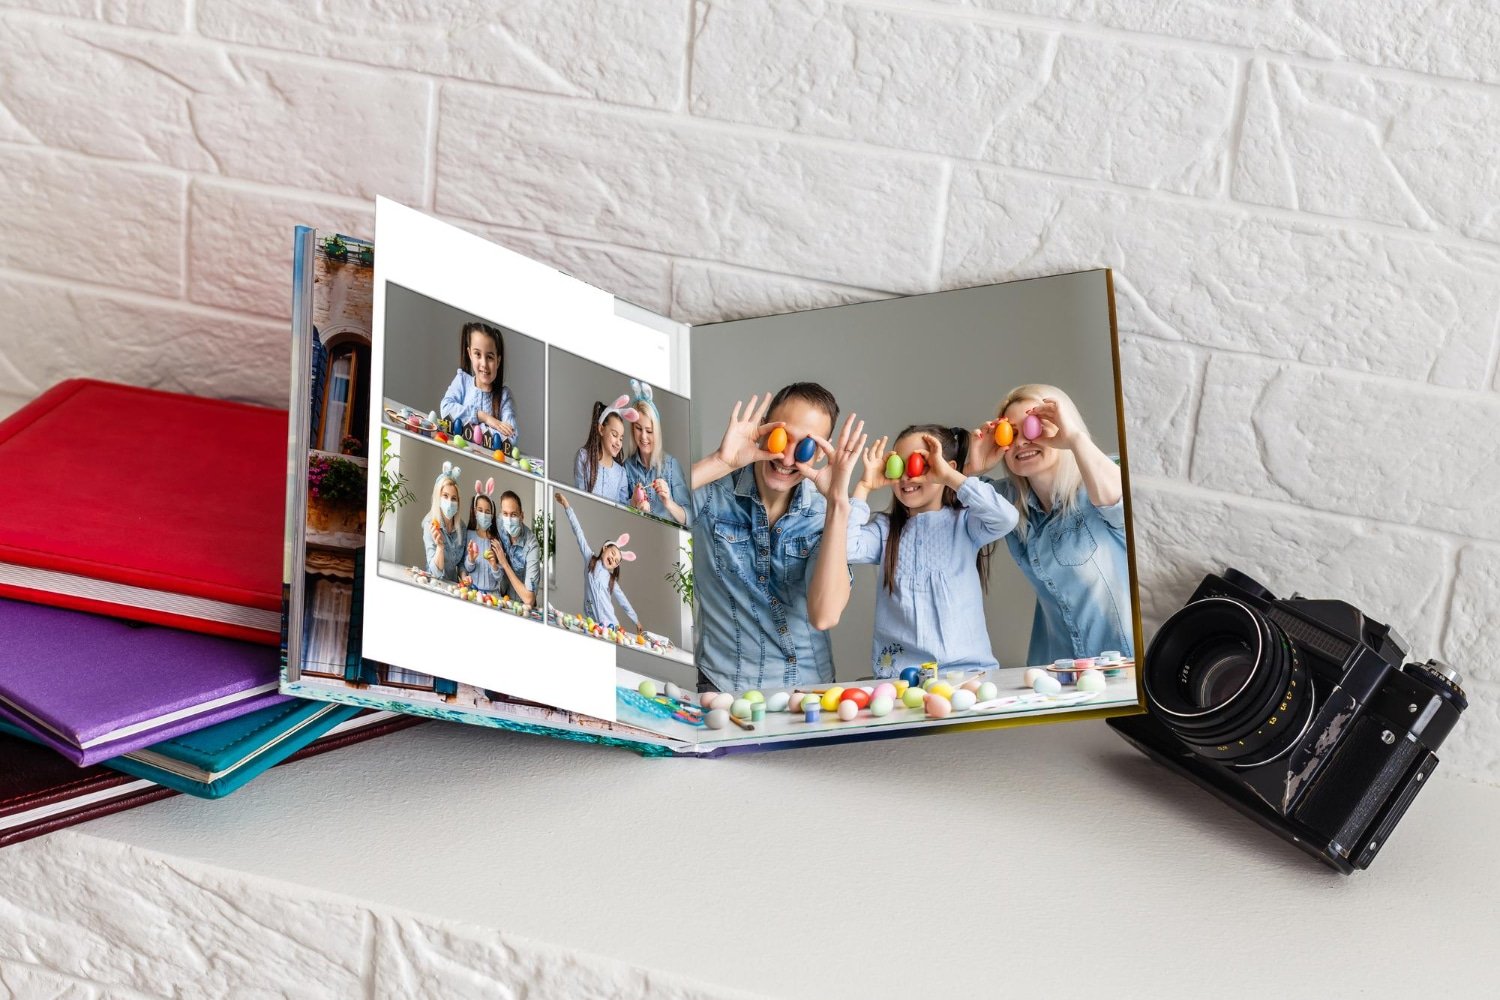 Capturing Memories: Why mpix.com Is Your Best Choice for Photo Printing